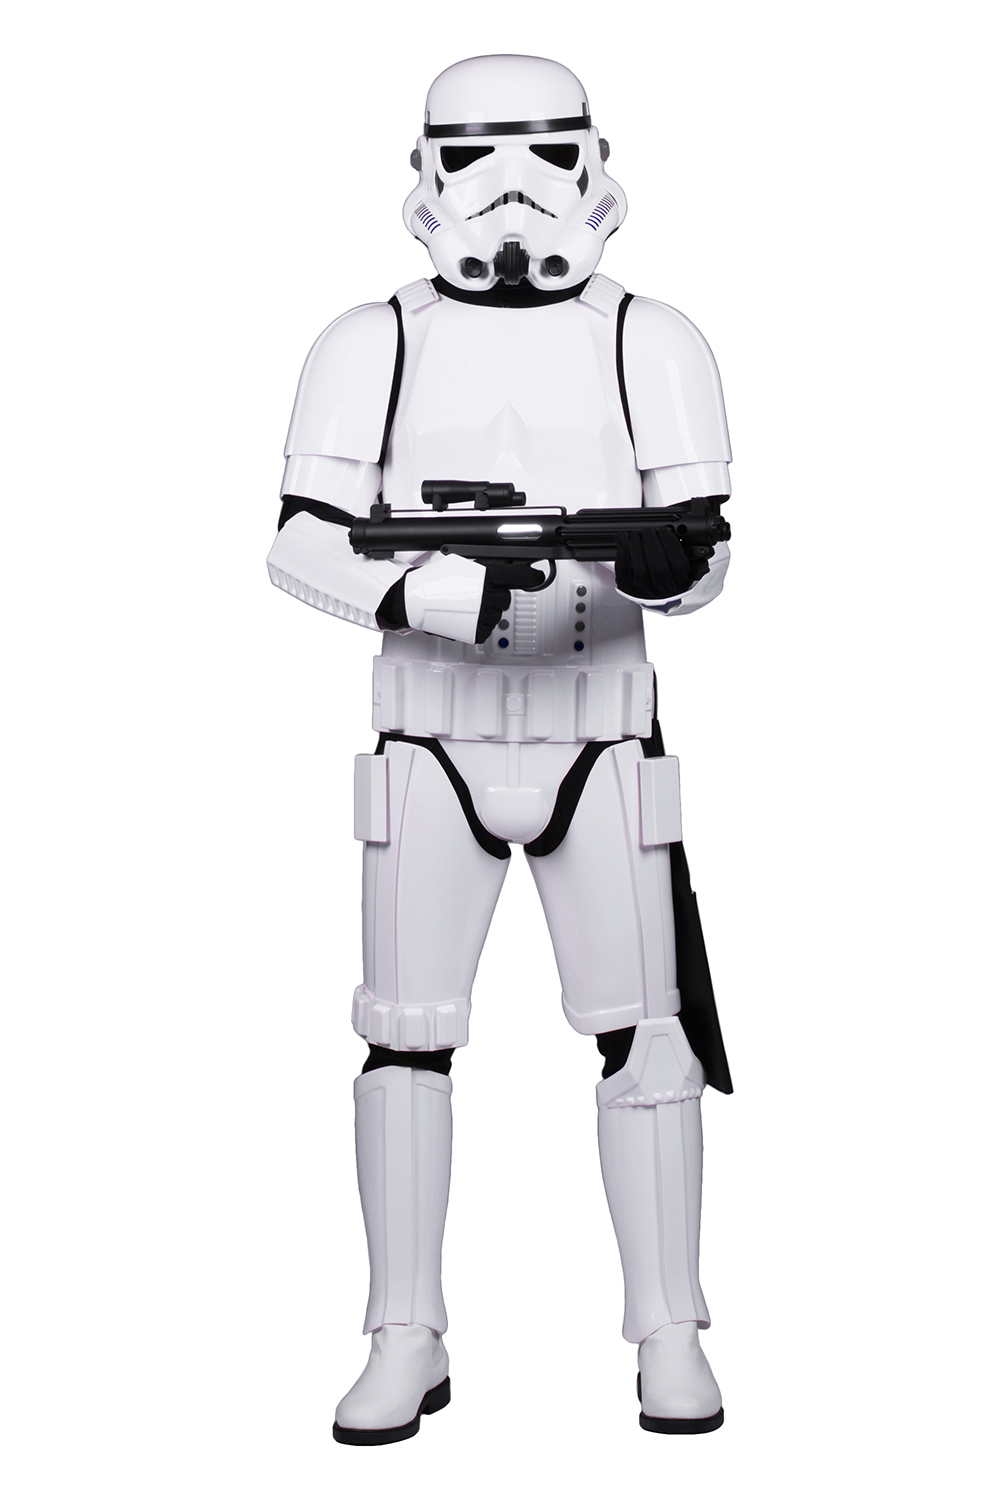 Stormtrooper replica armor from the stormtrooper store